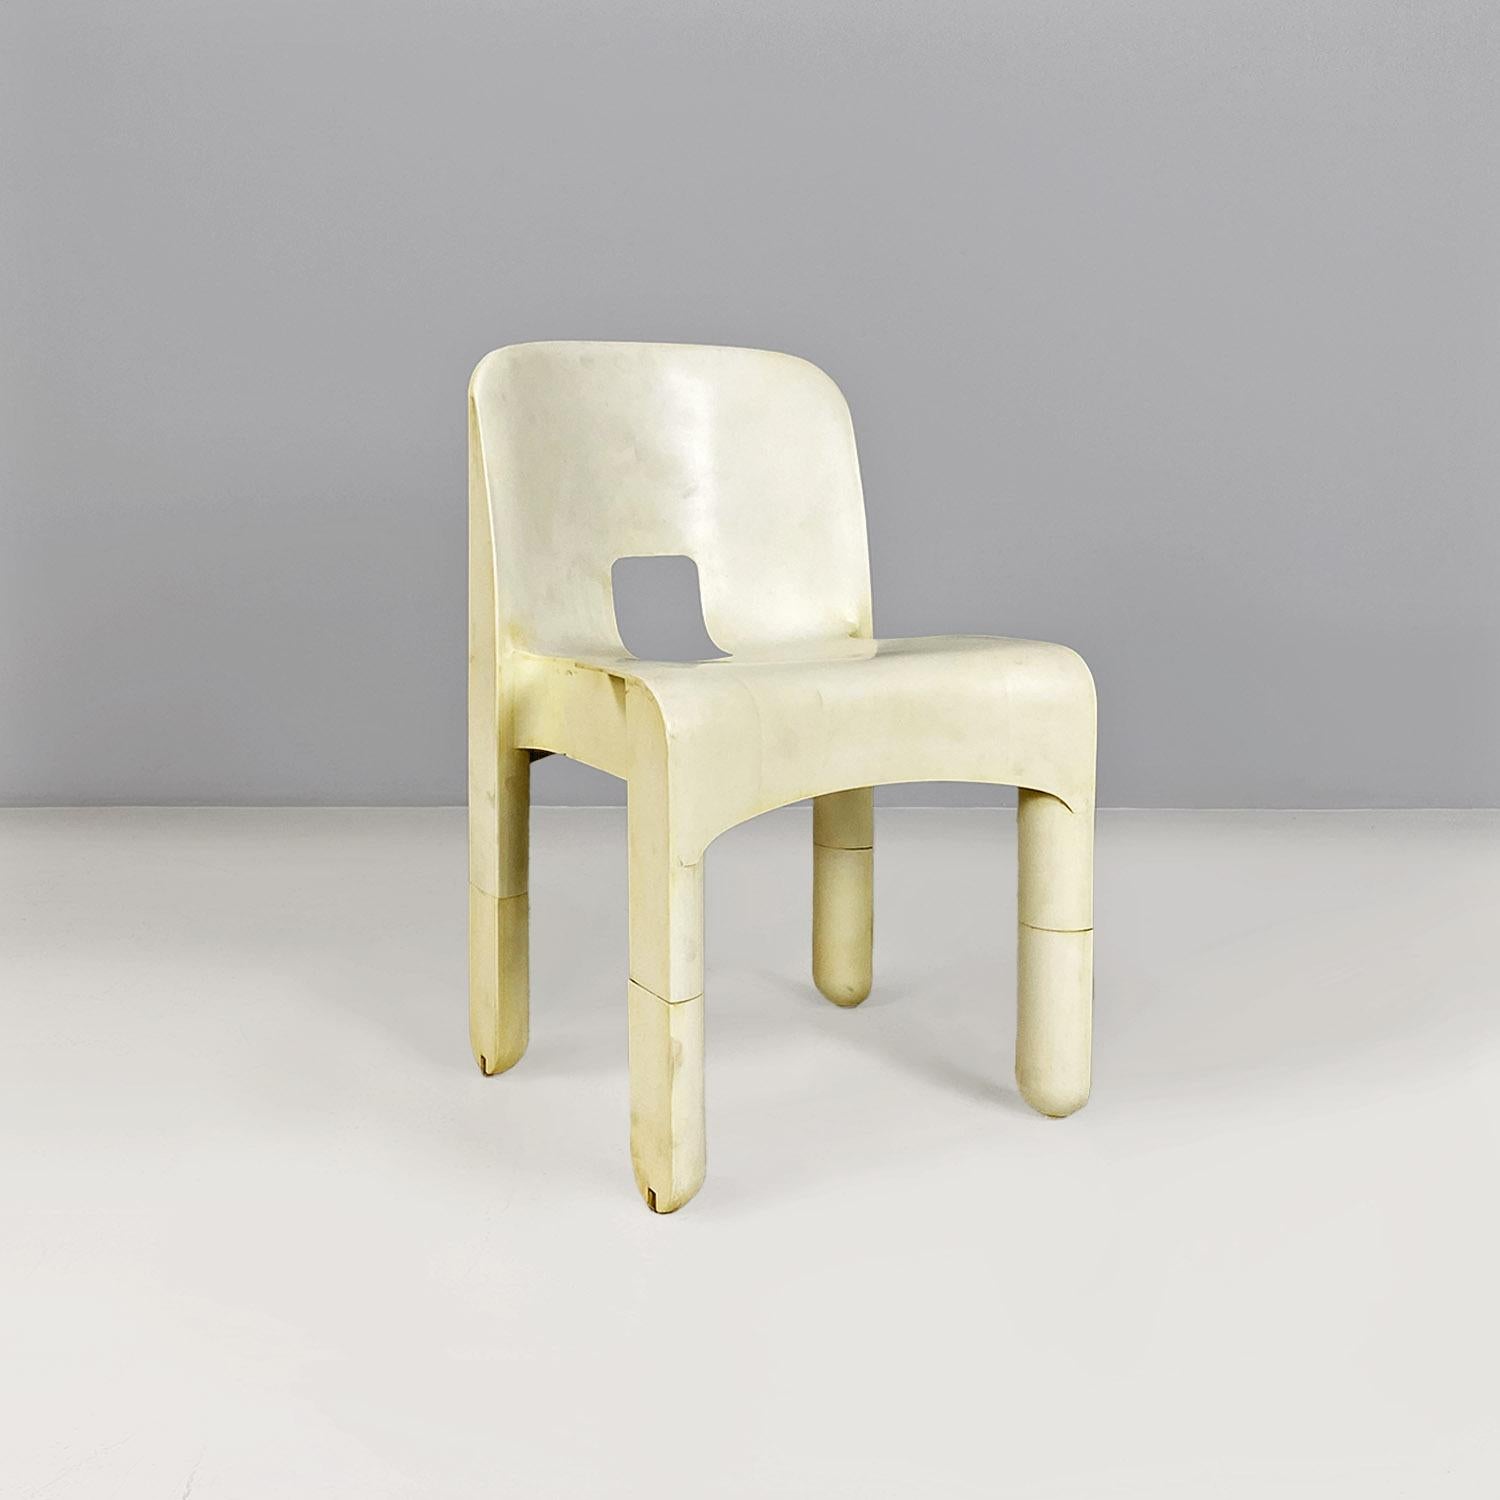 Italian modern white plastic 860 Universale Chairs, Joe Colombo, Kartell, 1970s In Good Condition For Sale In MIlano, IT